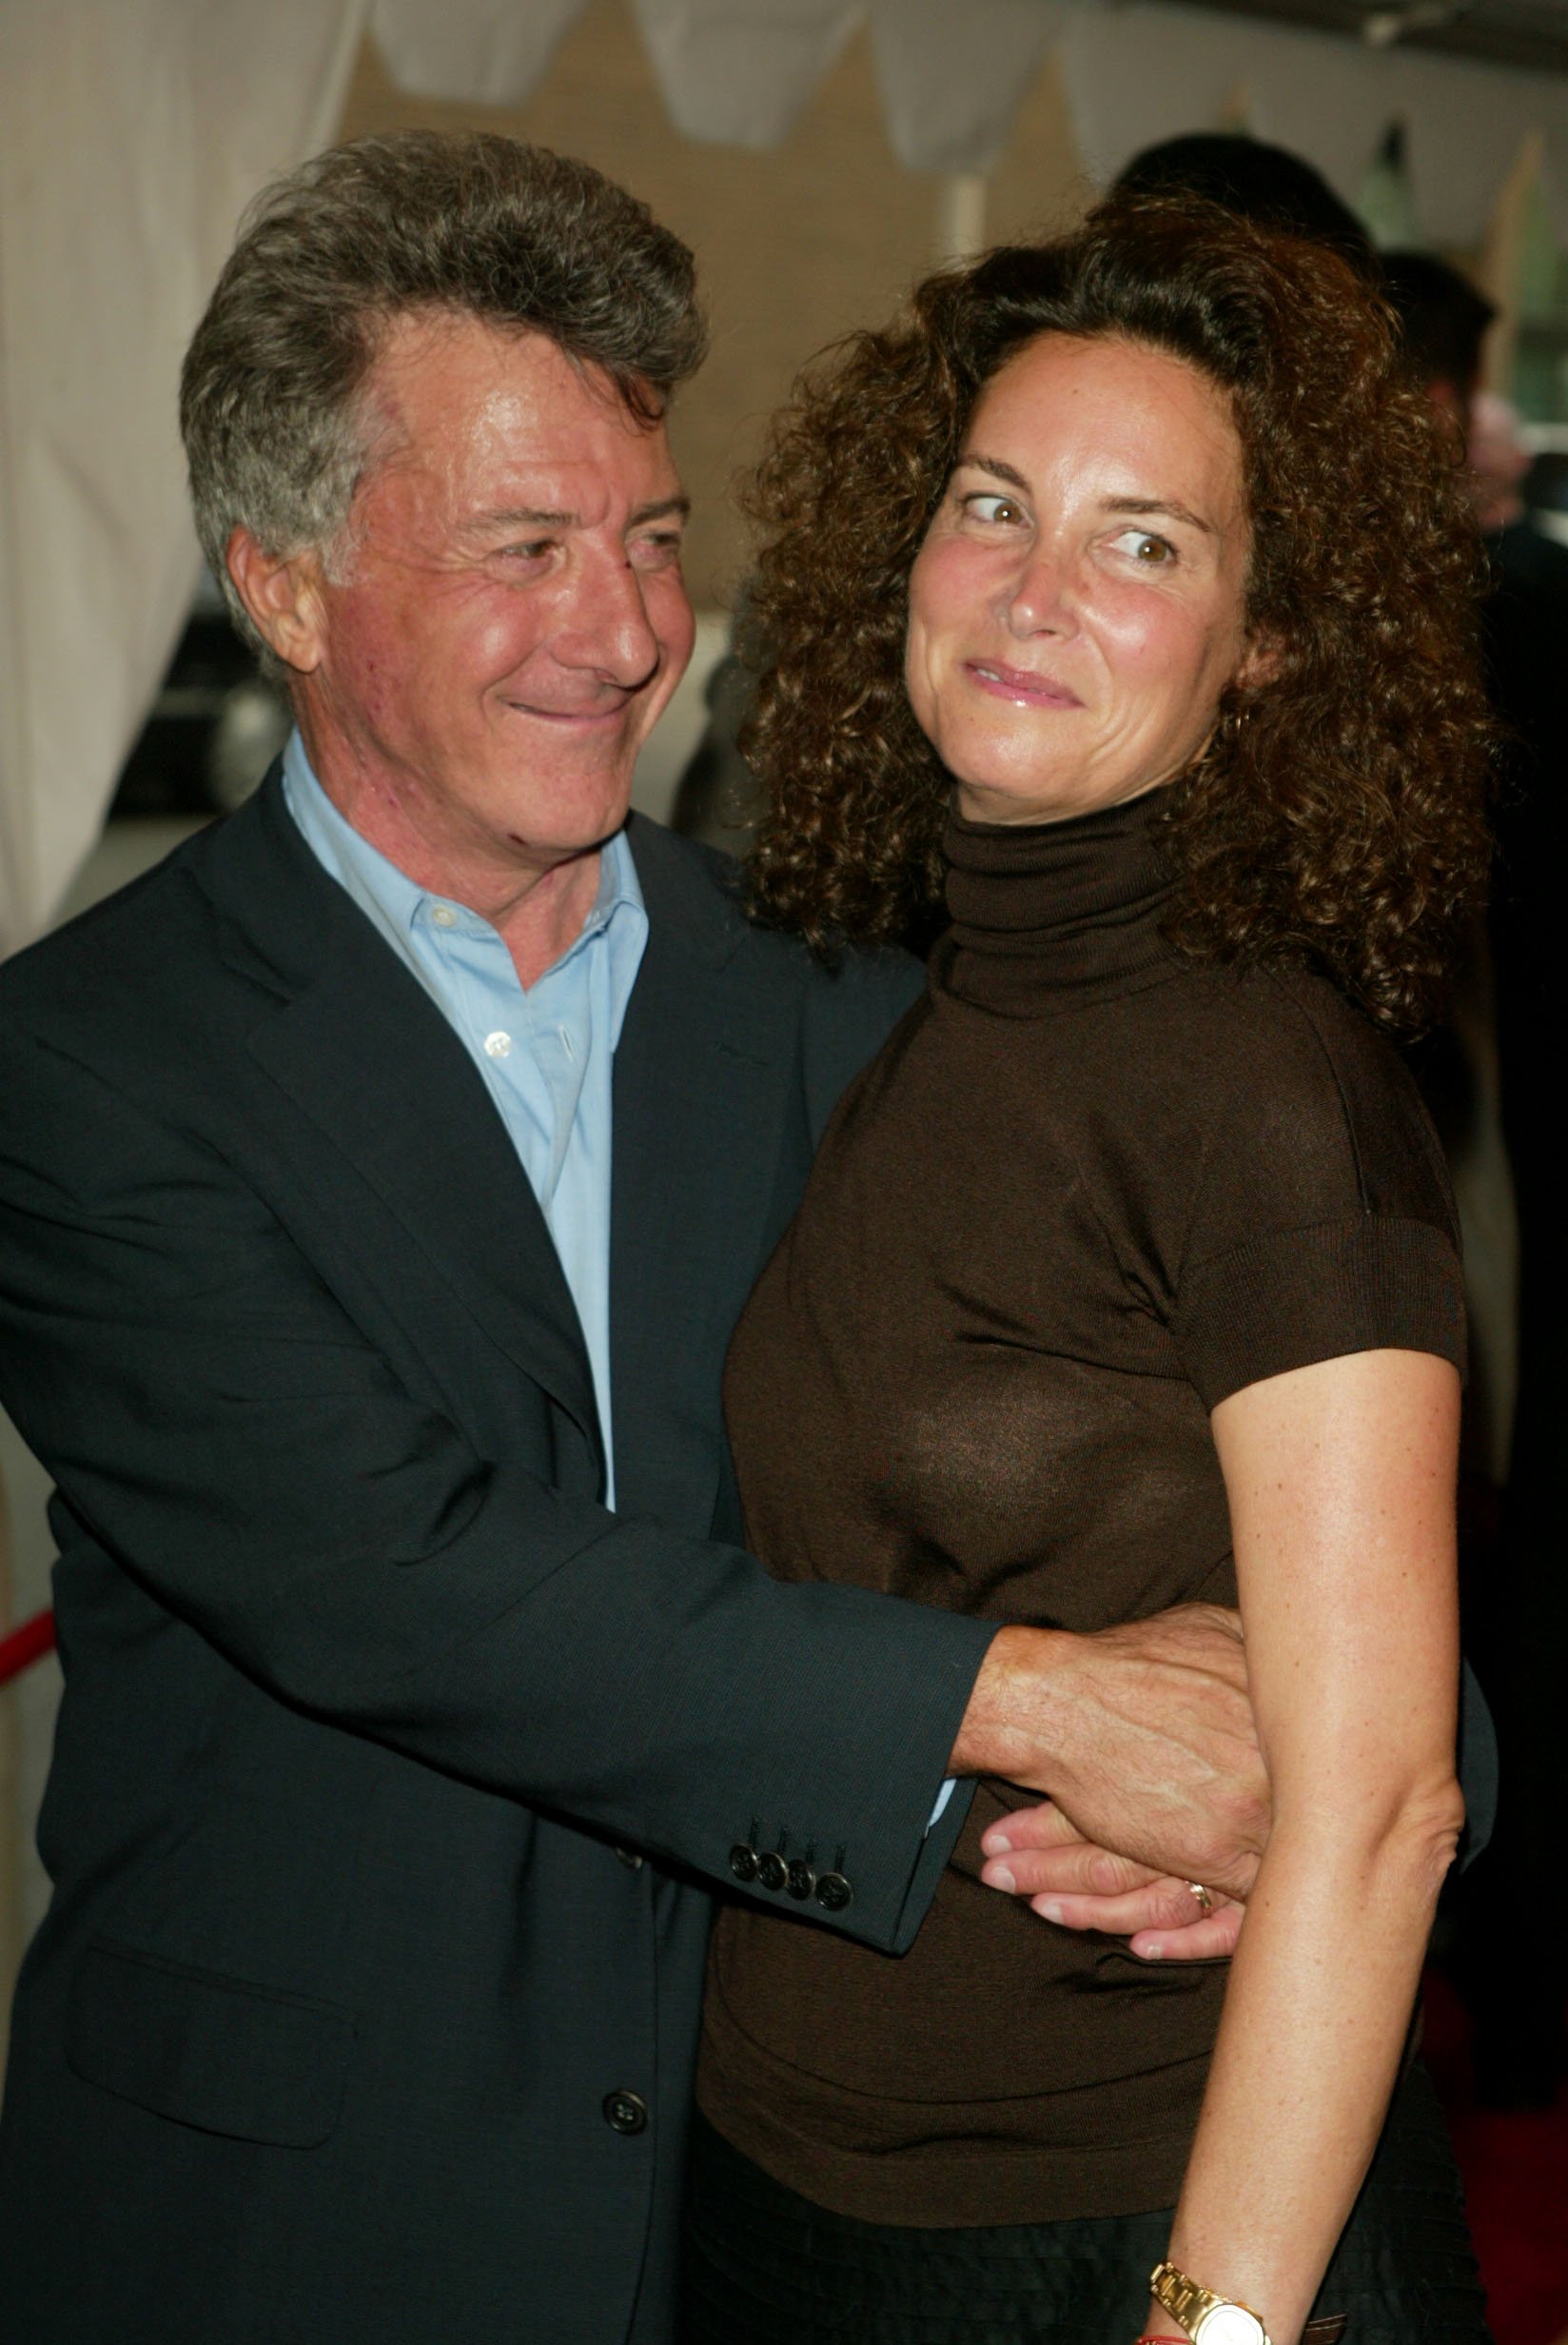 Dustin Hoffman with wife Lisa arriving at the "Moonlight Mile" screening during The Toronto International Film Festival 2002 in Toronto, Canada. September 9, 2002 | Photo: Getty Images